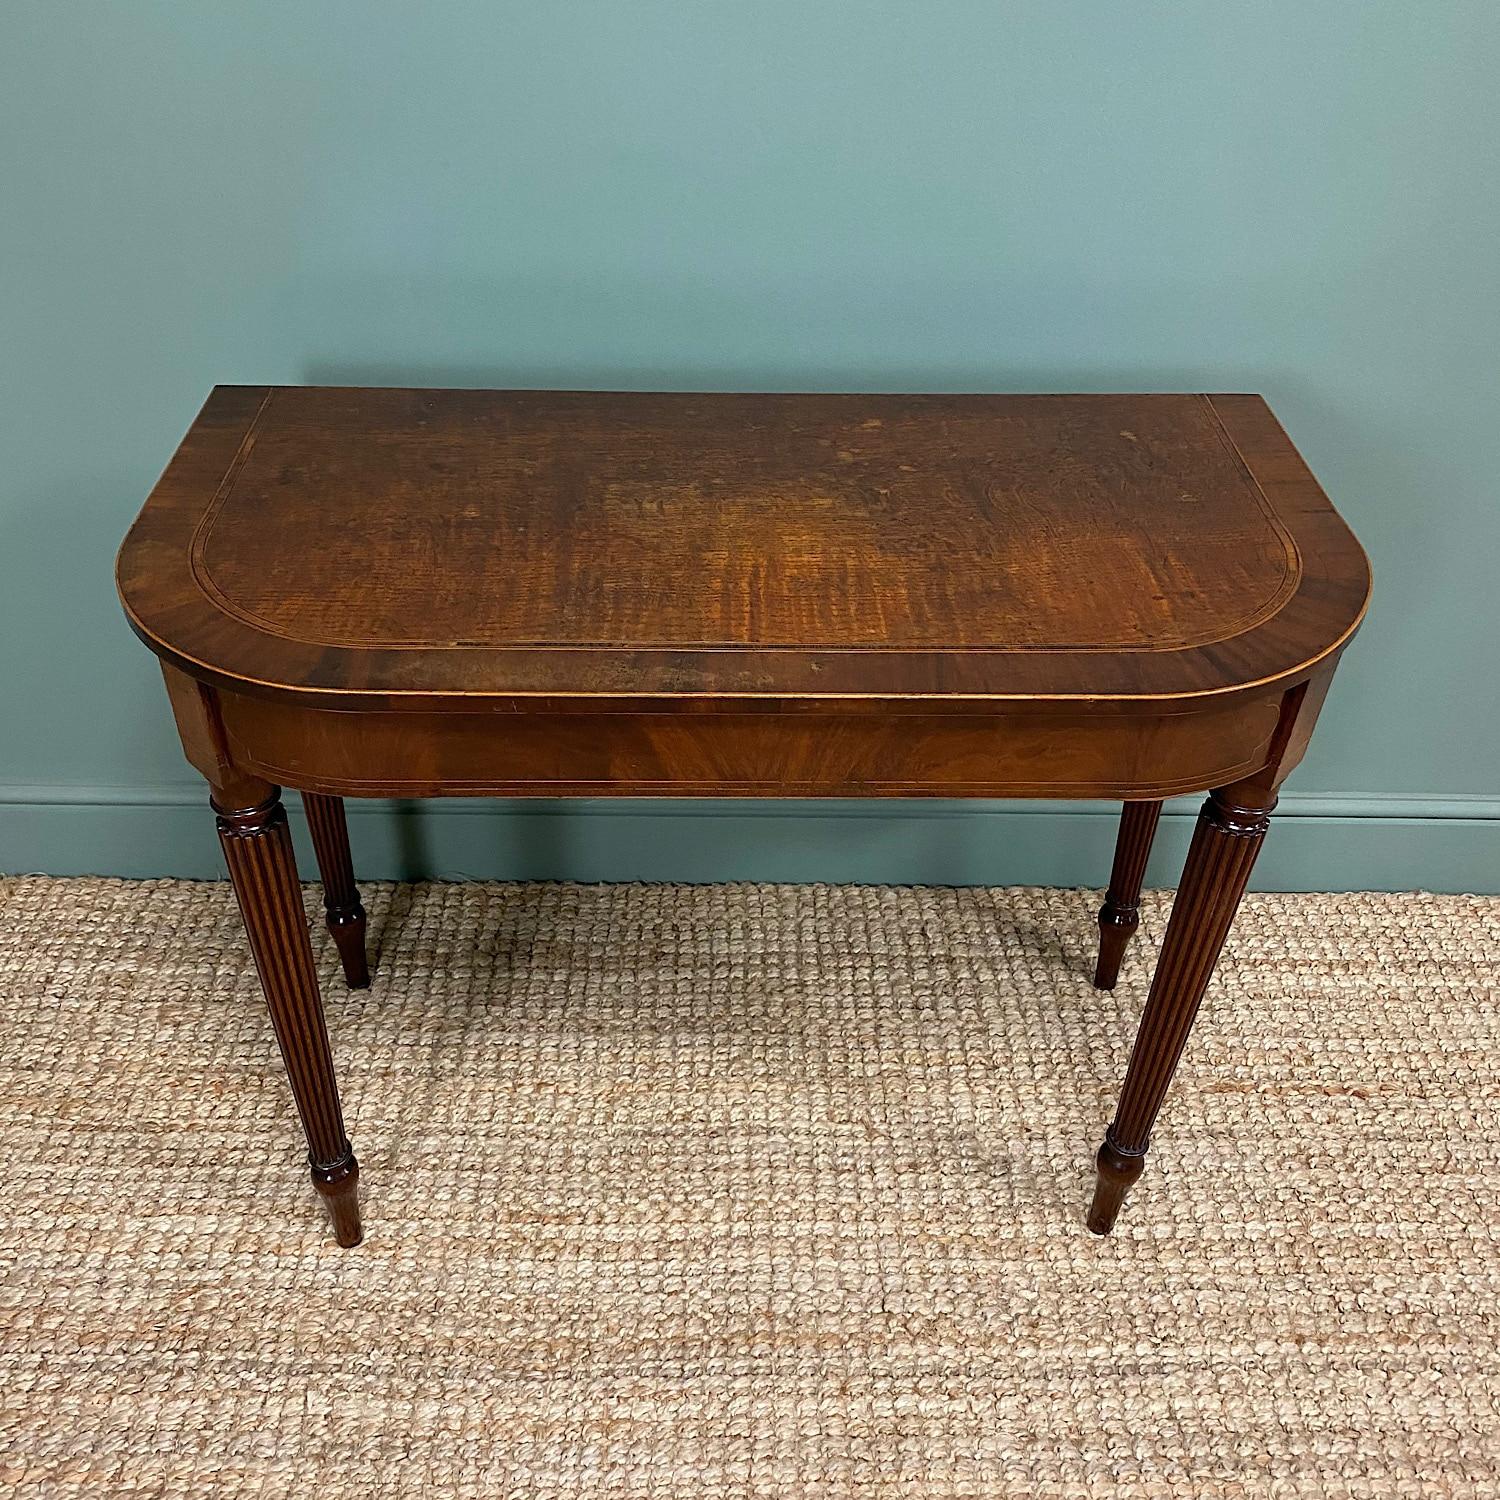 Country House 19th century Georgian Antique Side Table / Tea Table In Fair Condition For Sale In Clitheroe, GB